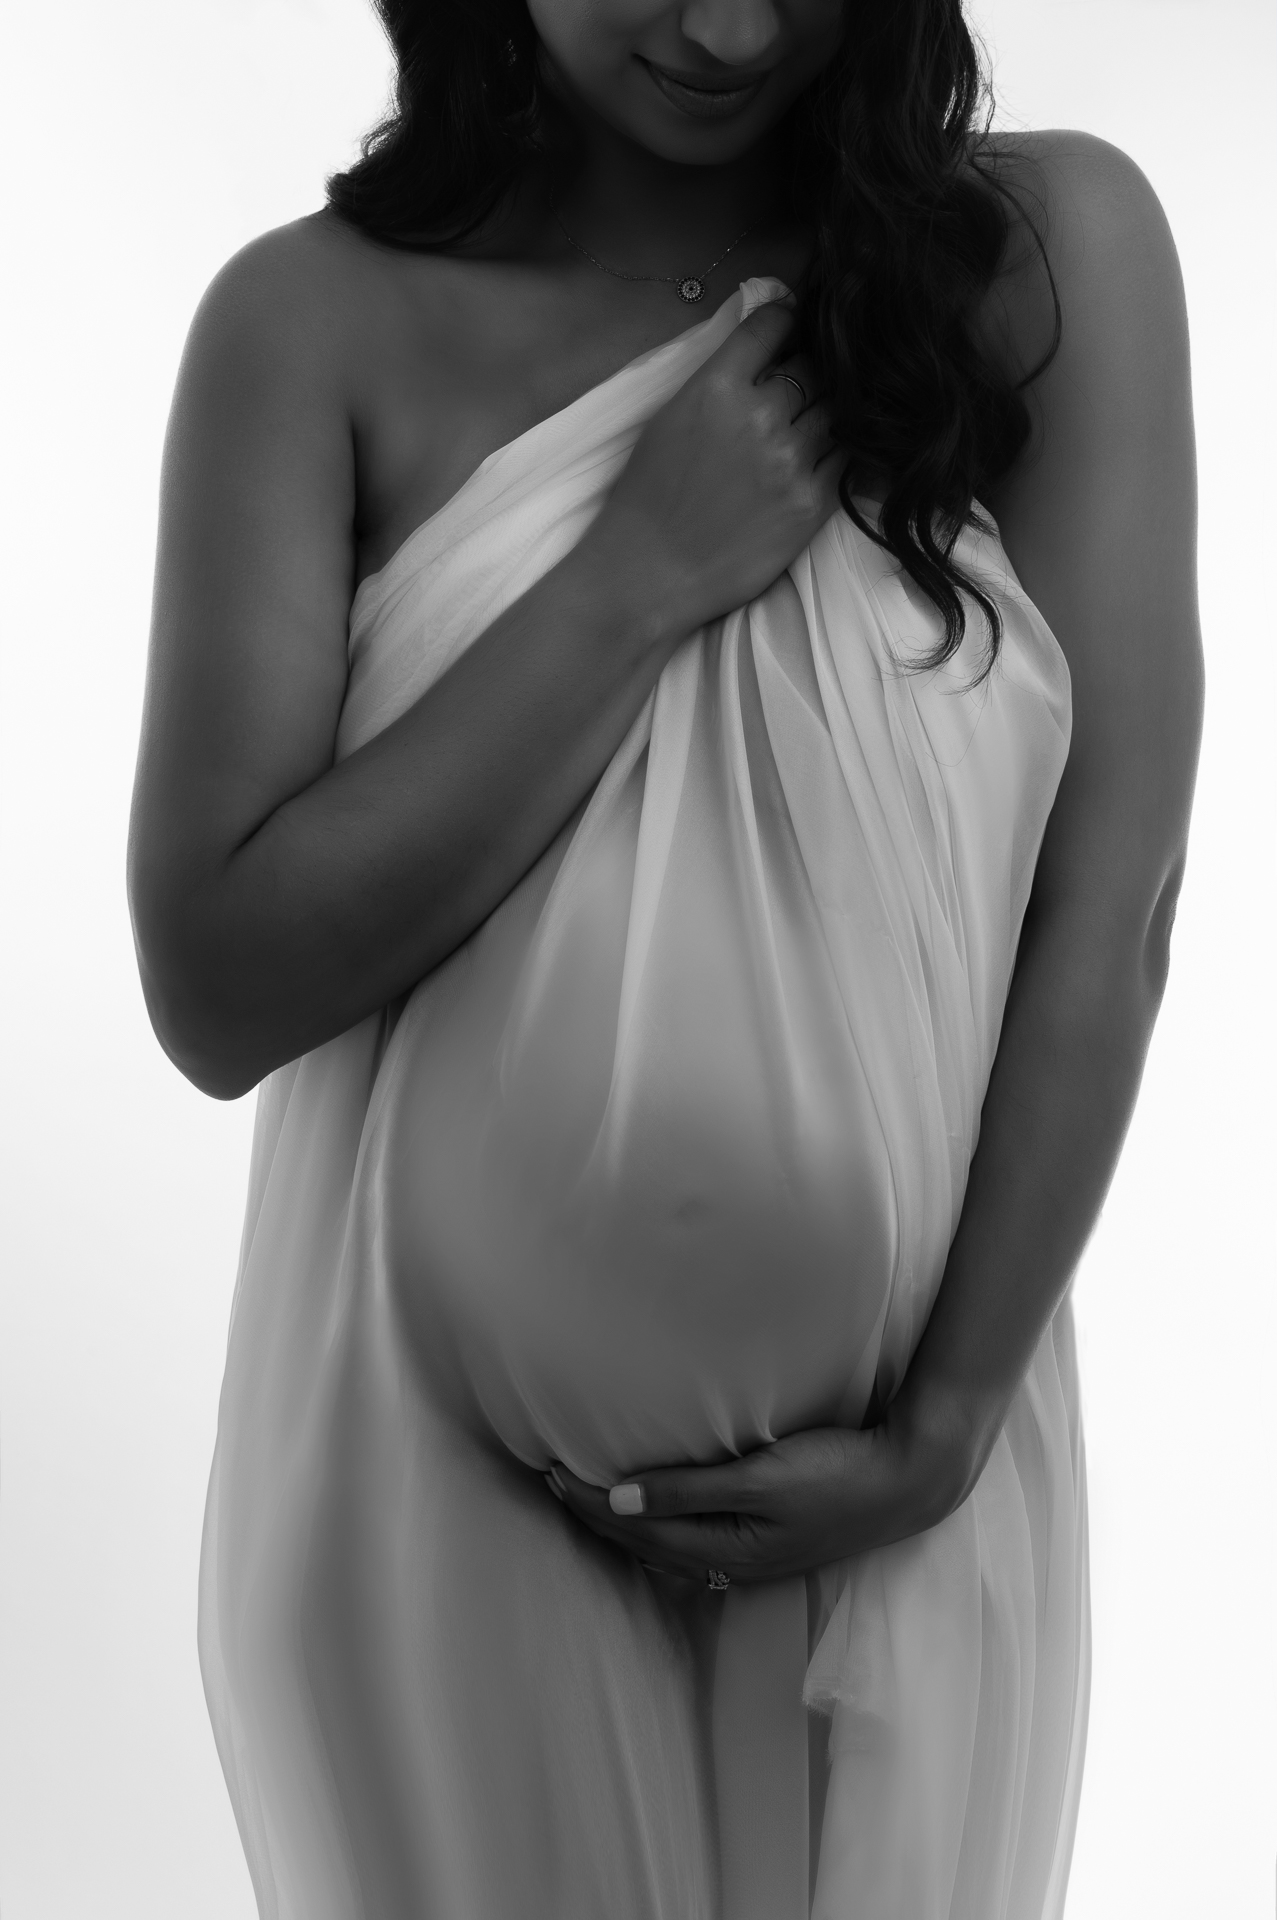 Pregnant woman covering herself with white fabric, black and white image